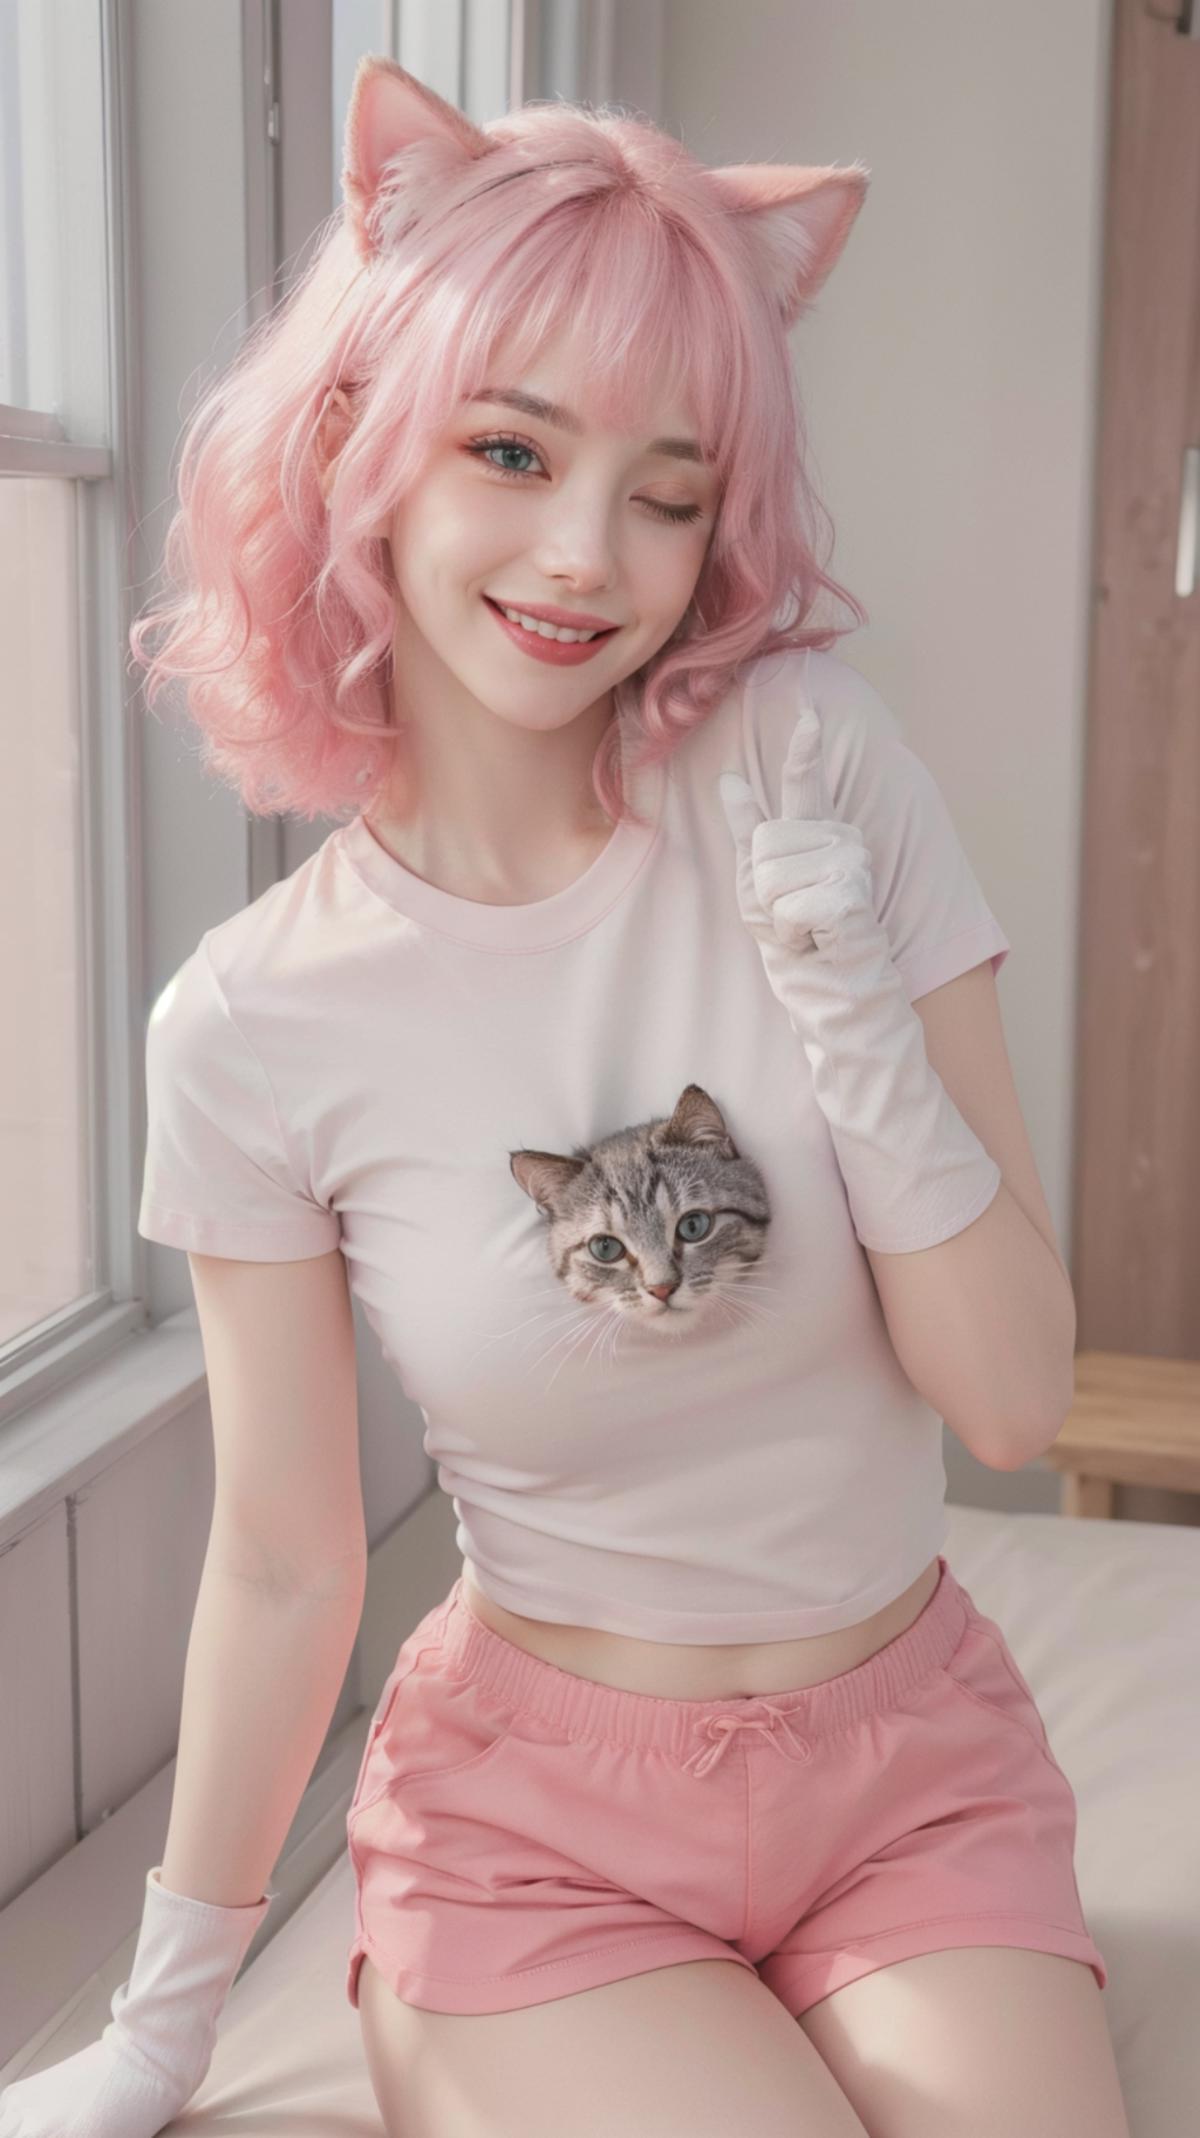 A young woman with pink hair is wearing a white shirt that has a cat sitting on her chest. She is smiling and pointing at the cat.